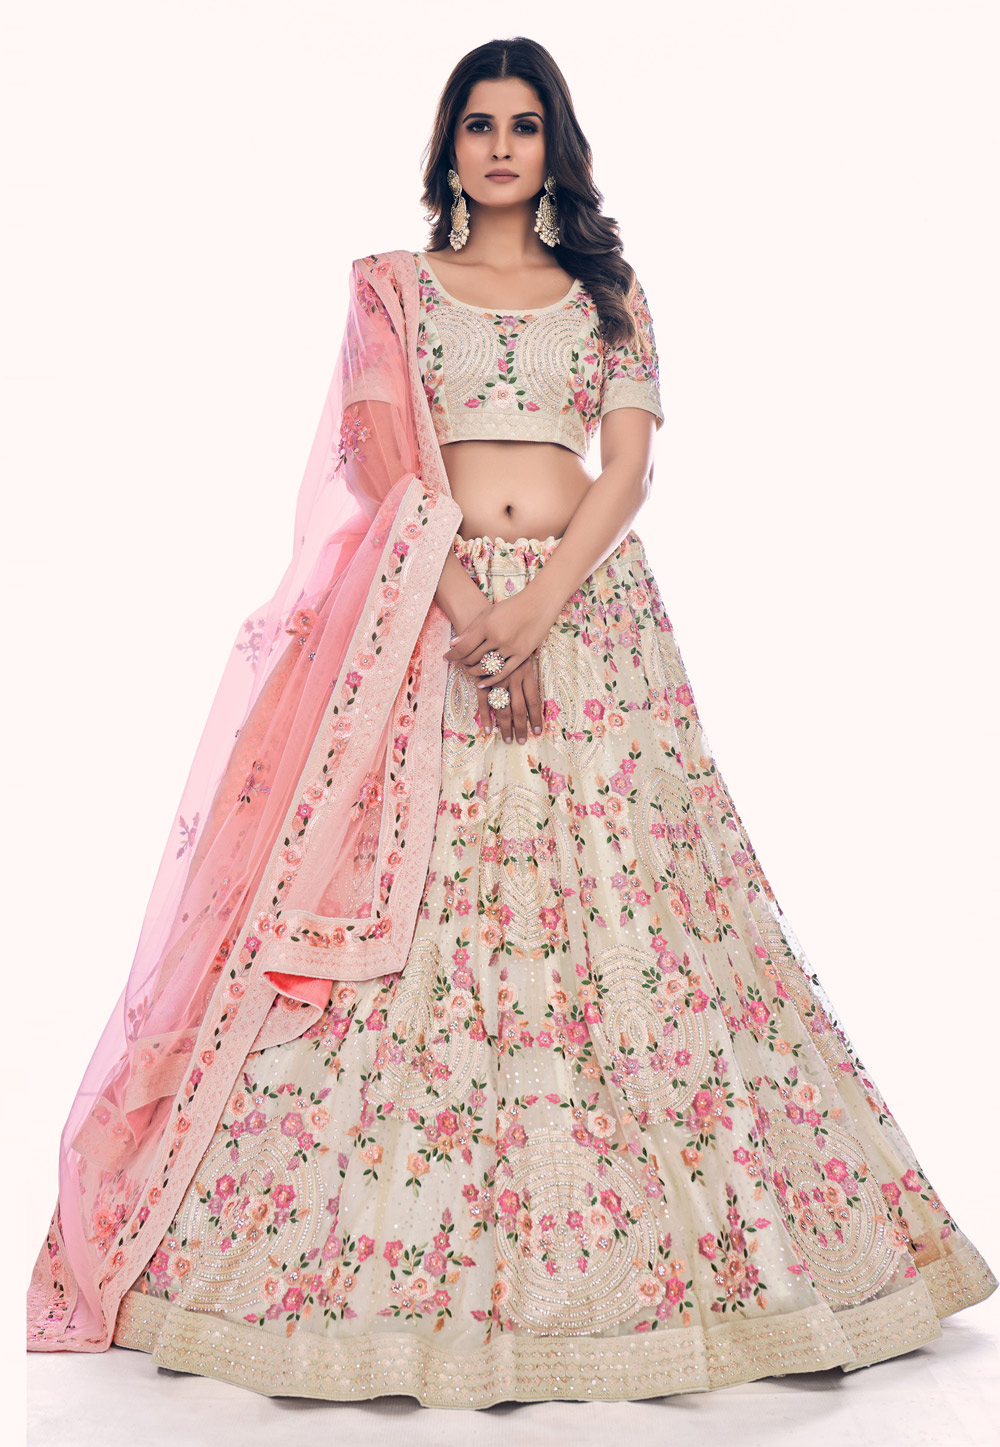 Soft Net Party Wear Lehenga Saree In Pink With Stone Work - Saree